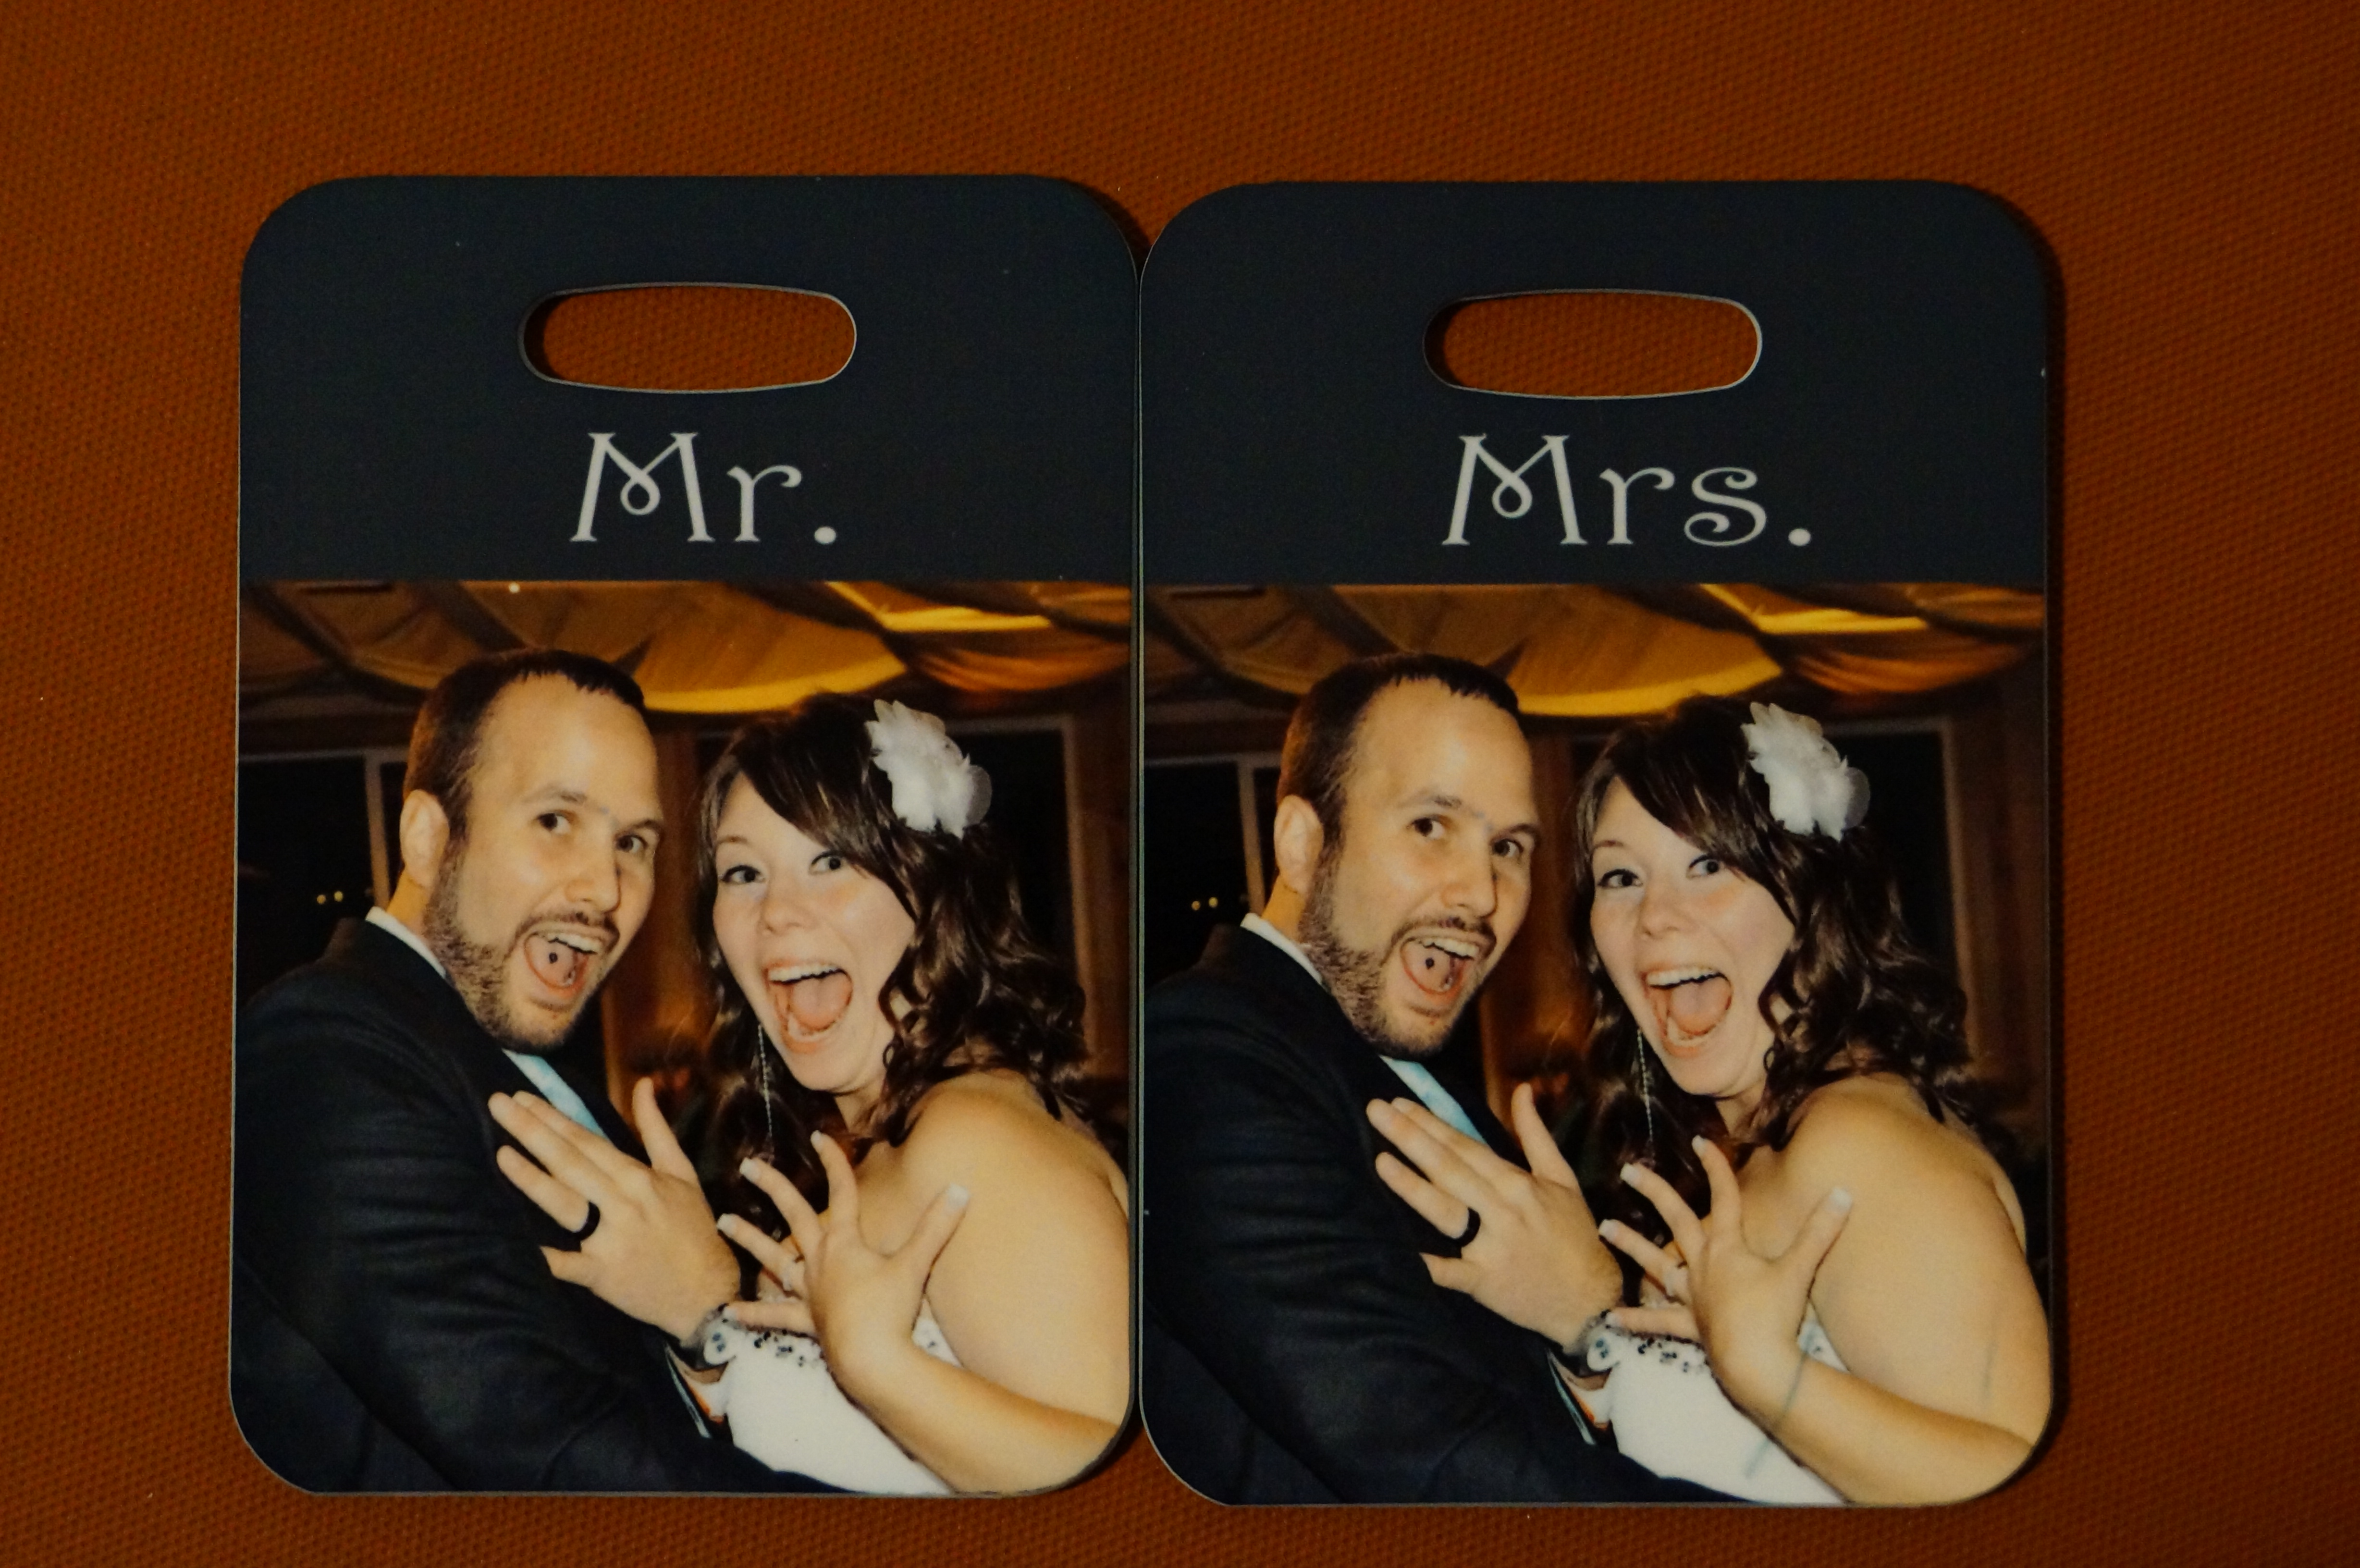 Wedding luggage tags made with sublimation printing